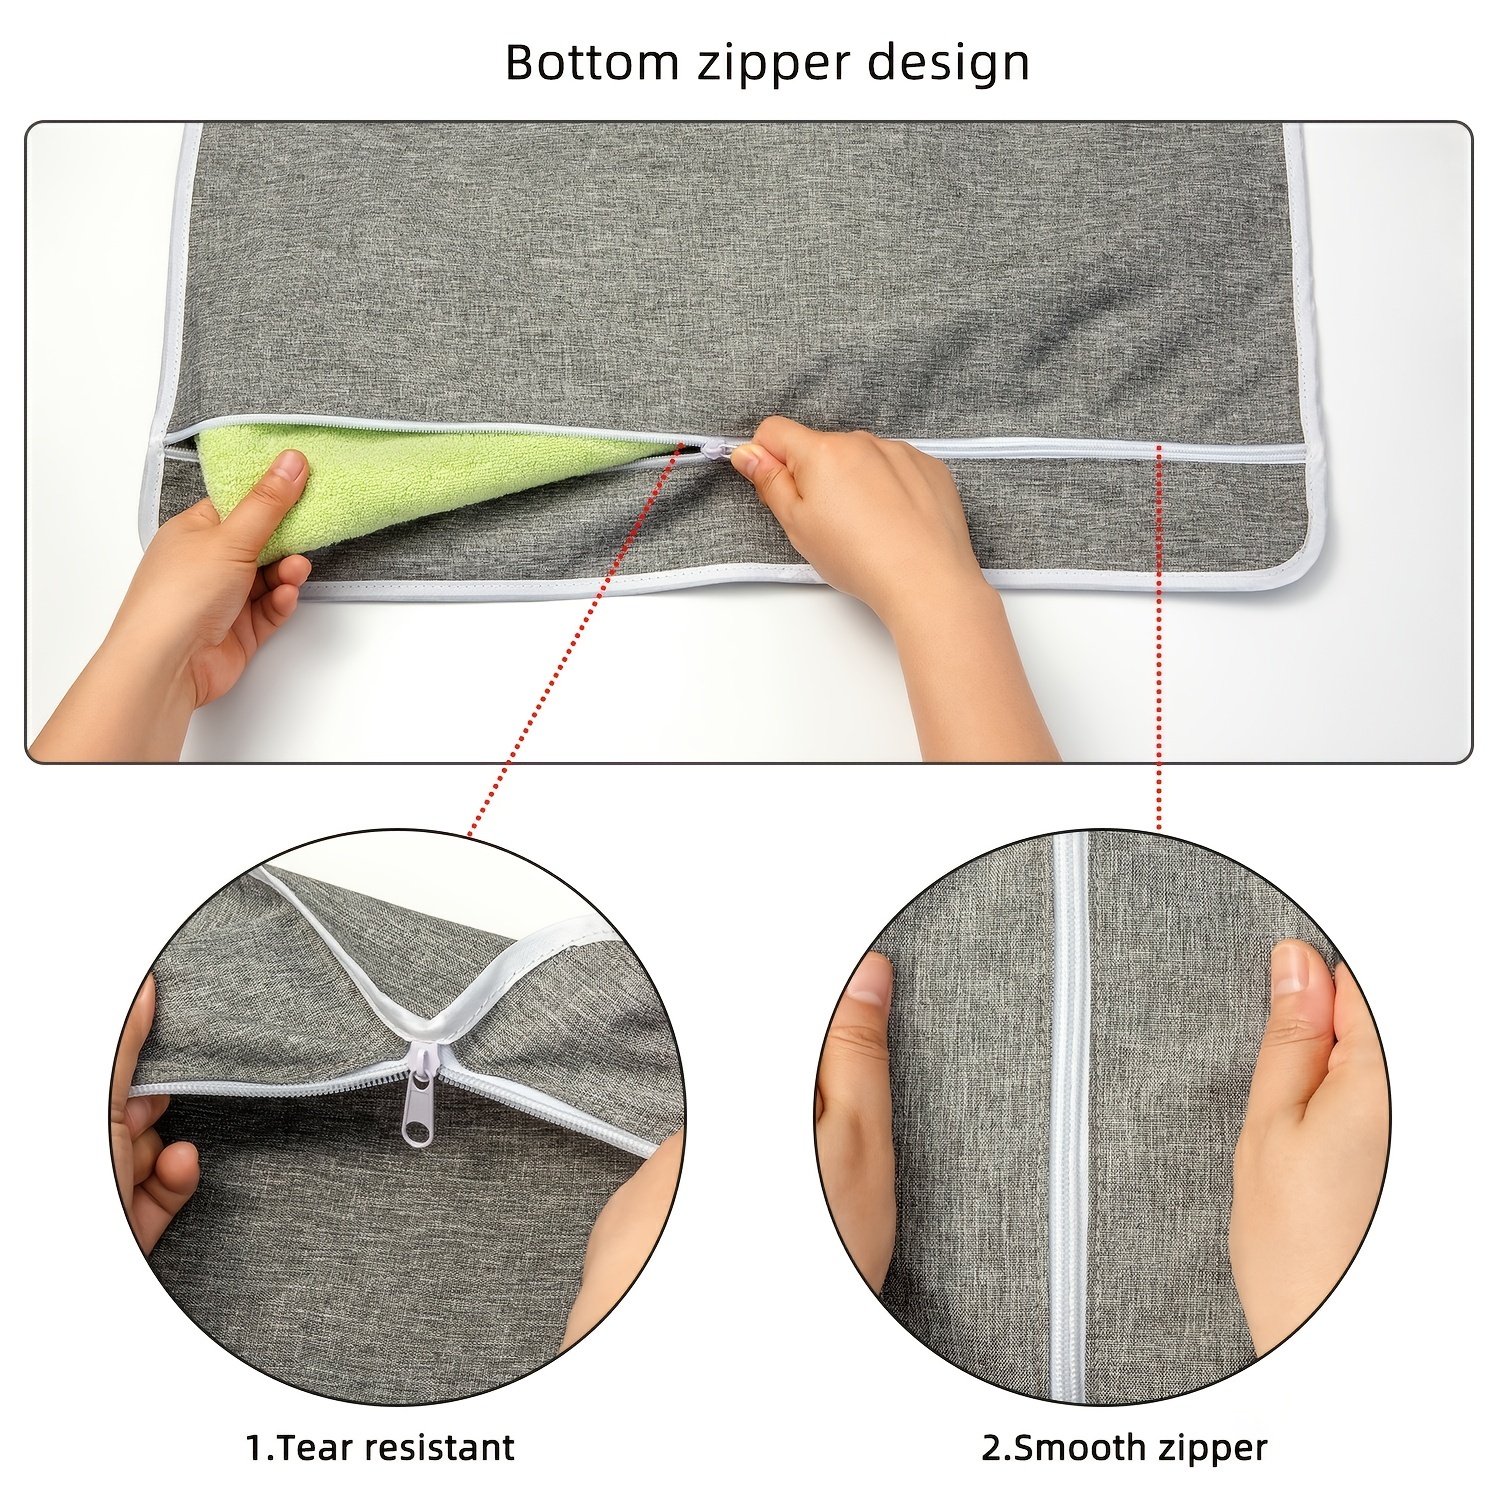 KEEPJOY Hanging Laundry Hamper Bag: The Smartest Laundry Hamper? |  Apartment Therapy